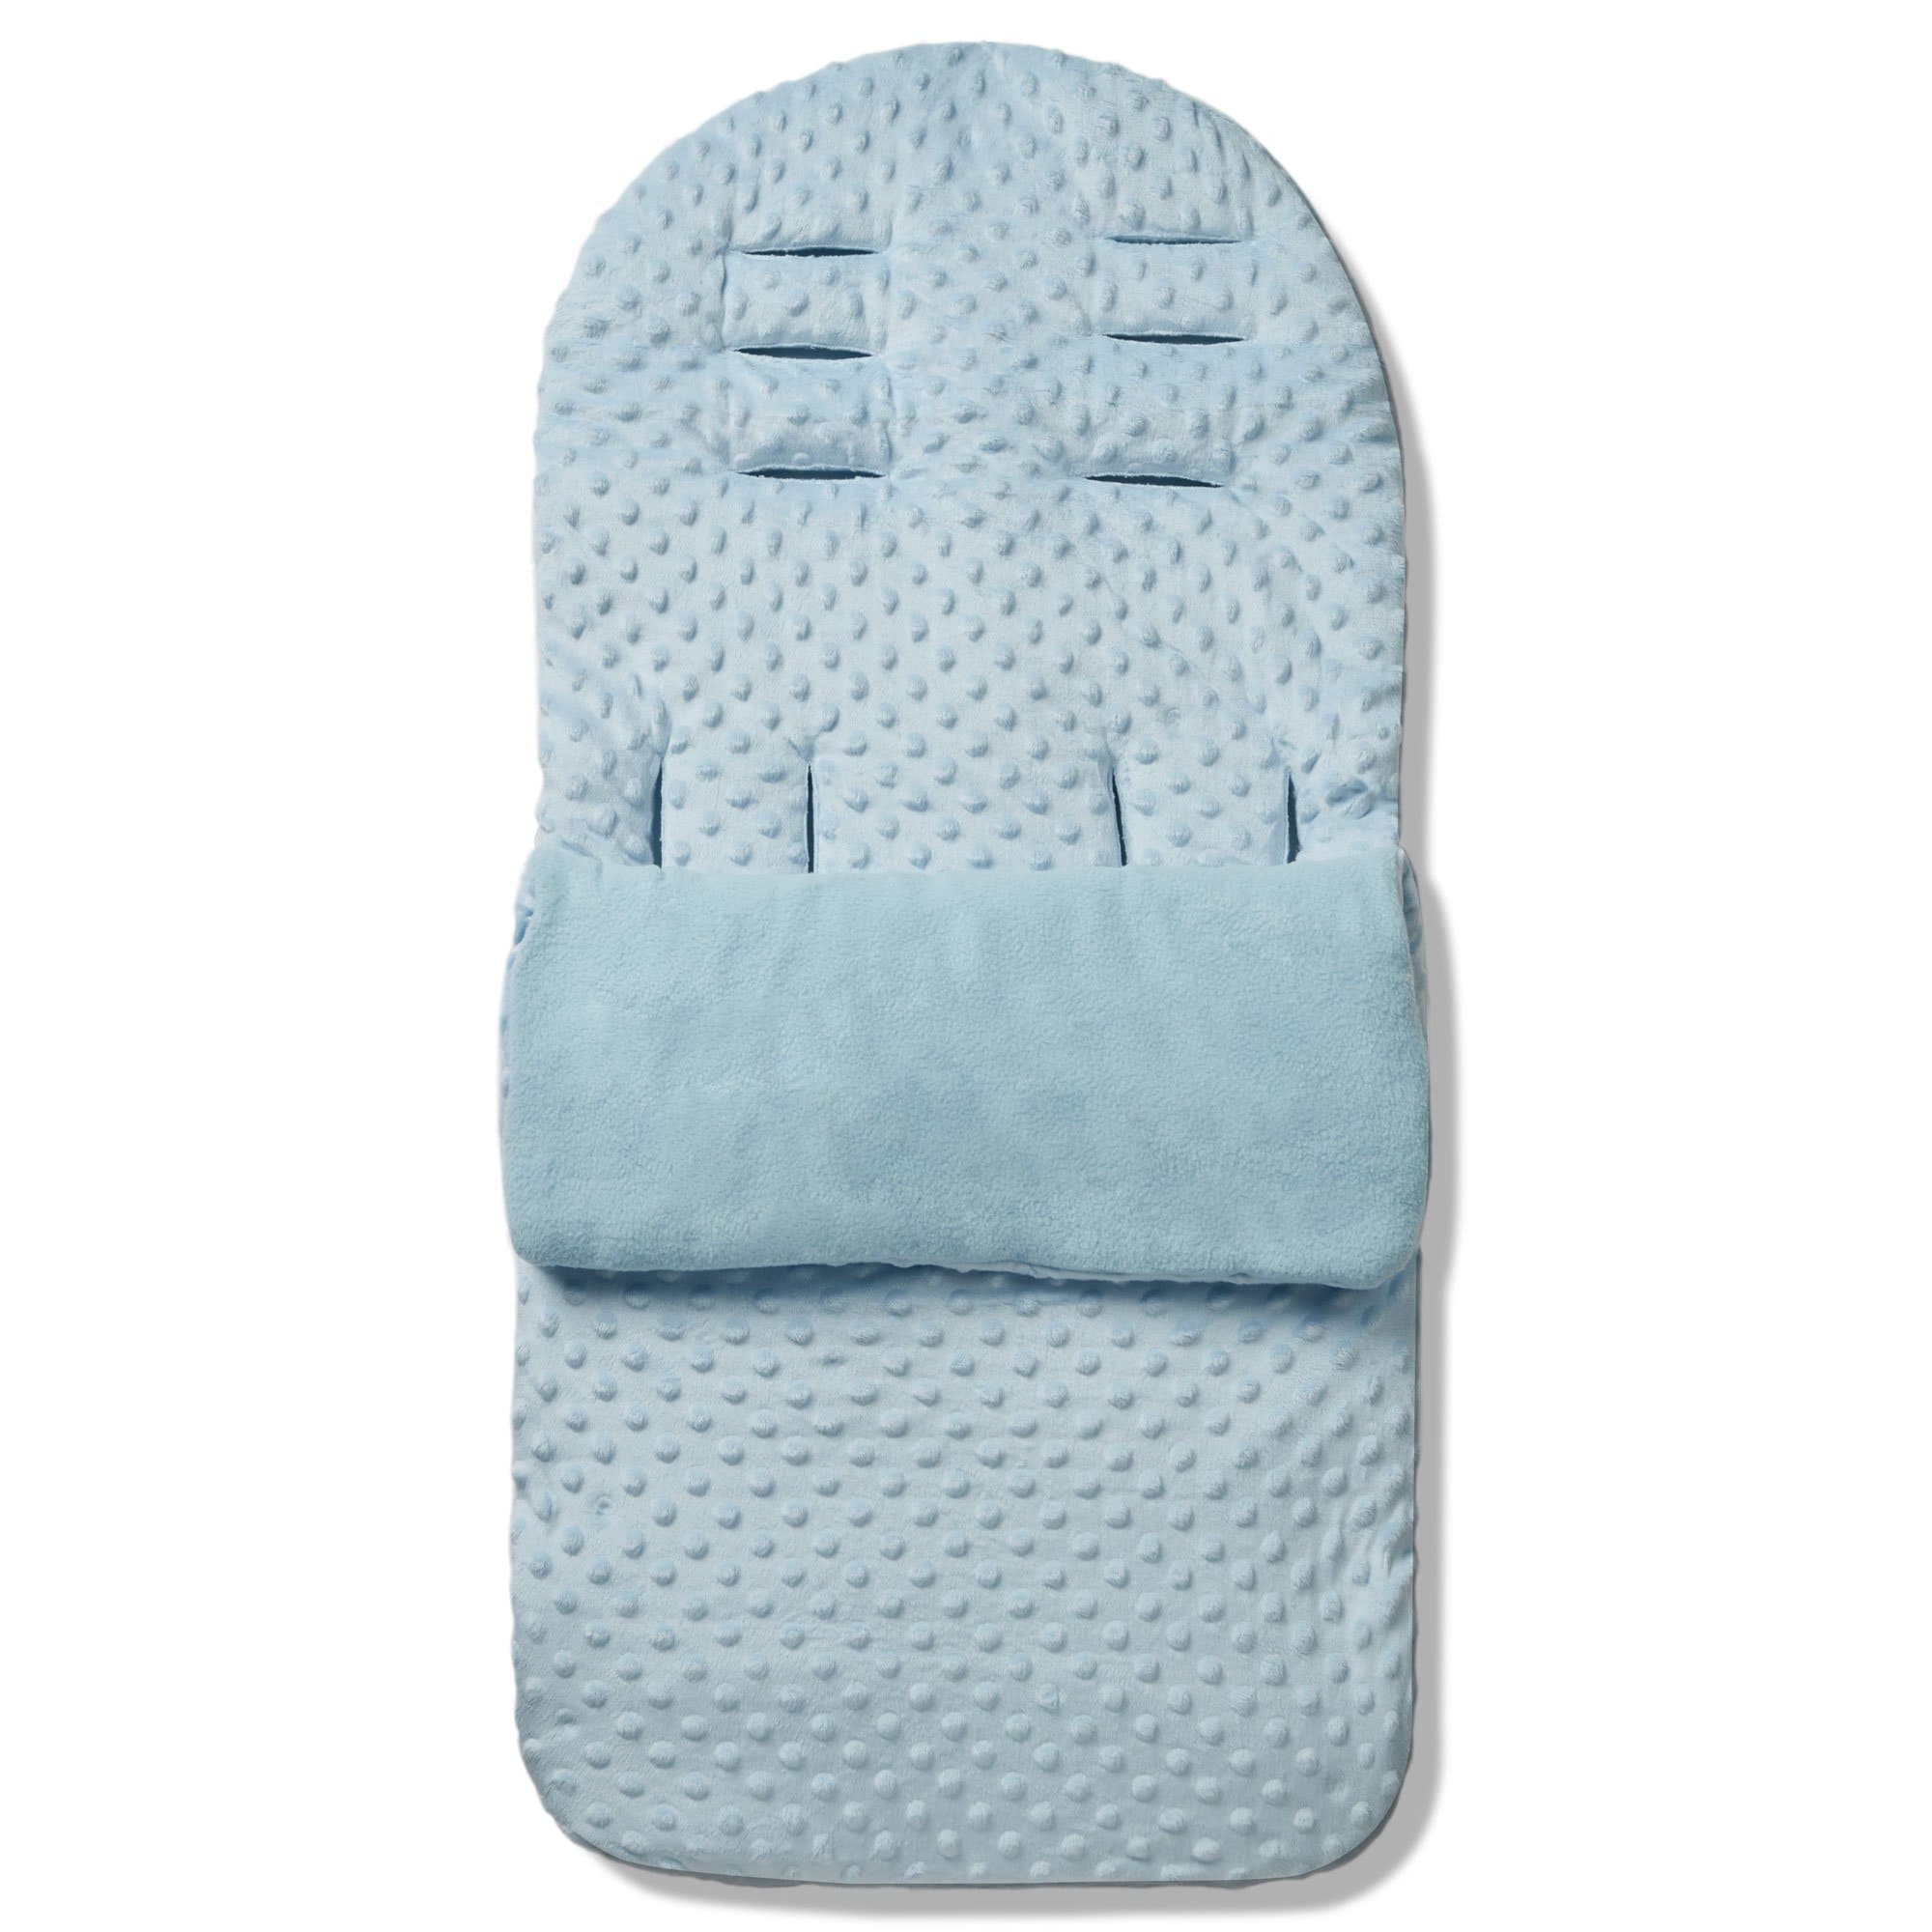 Dimple Footmuff / Cosy Toes Compatible with Egg - Blue / Fits All Models | For Your Little One